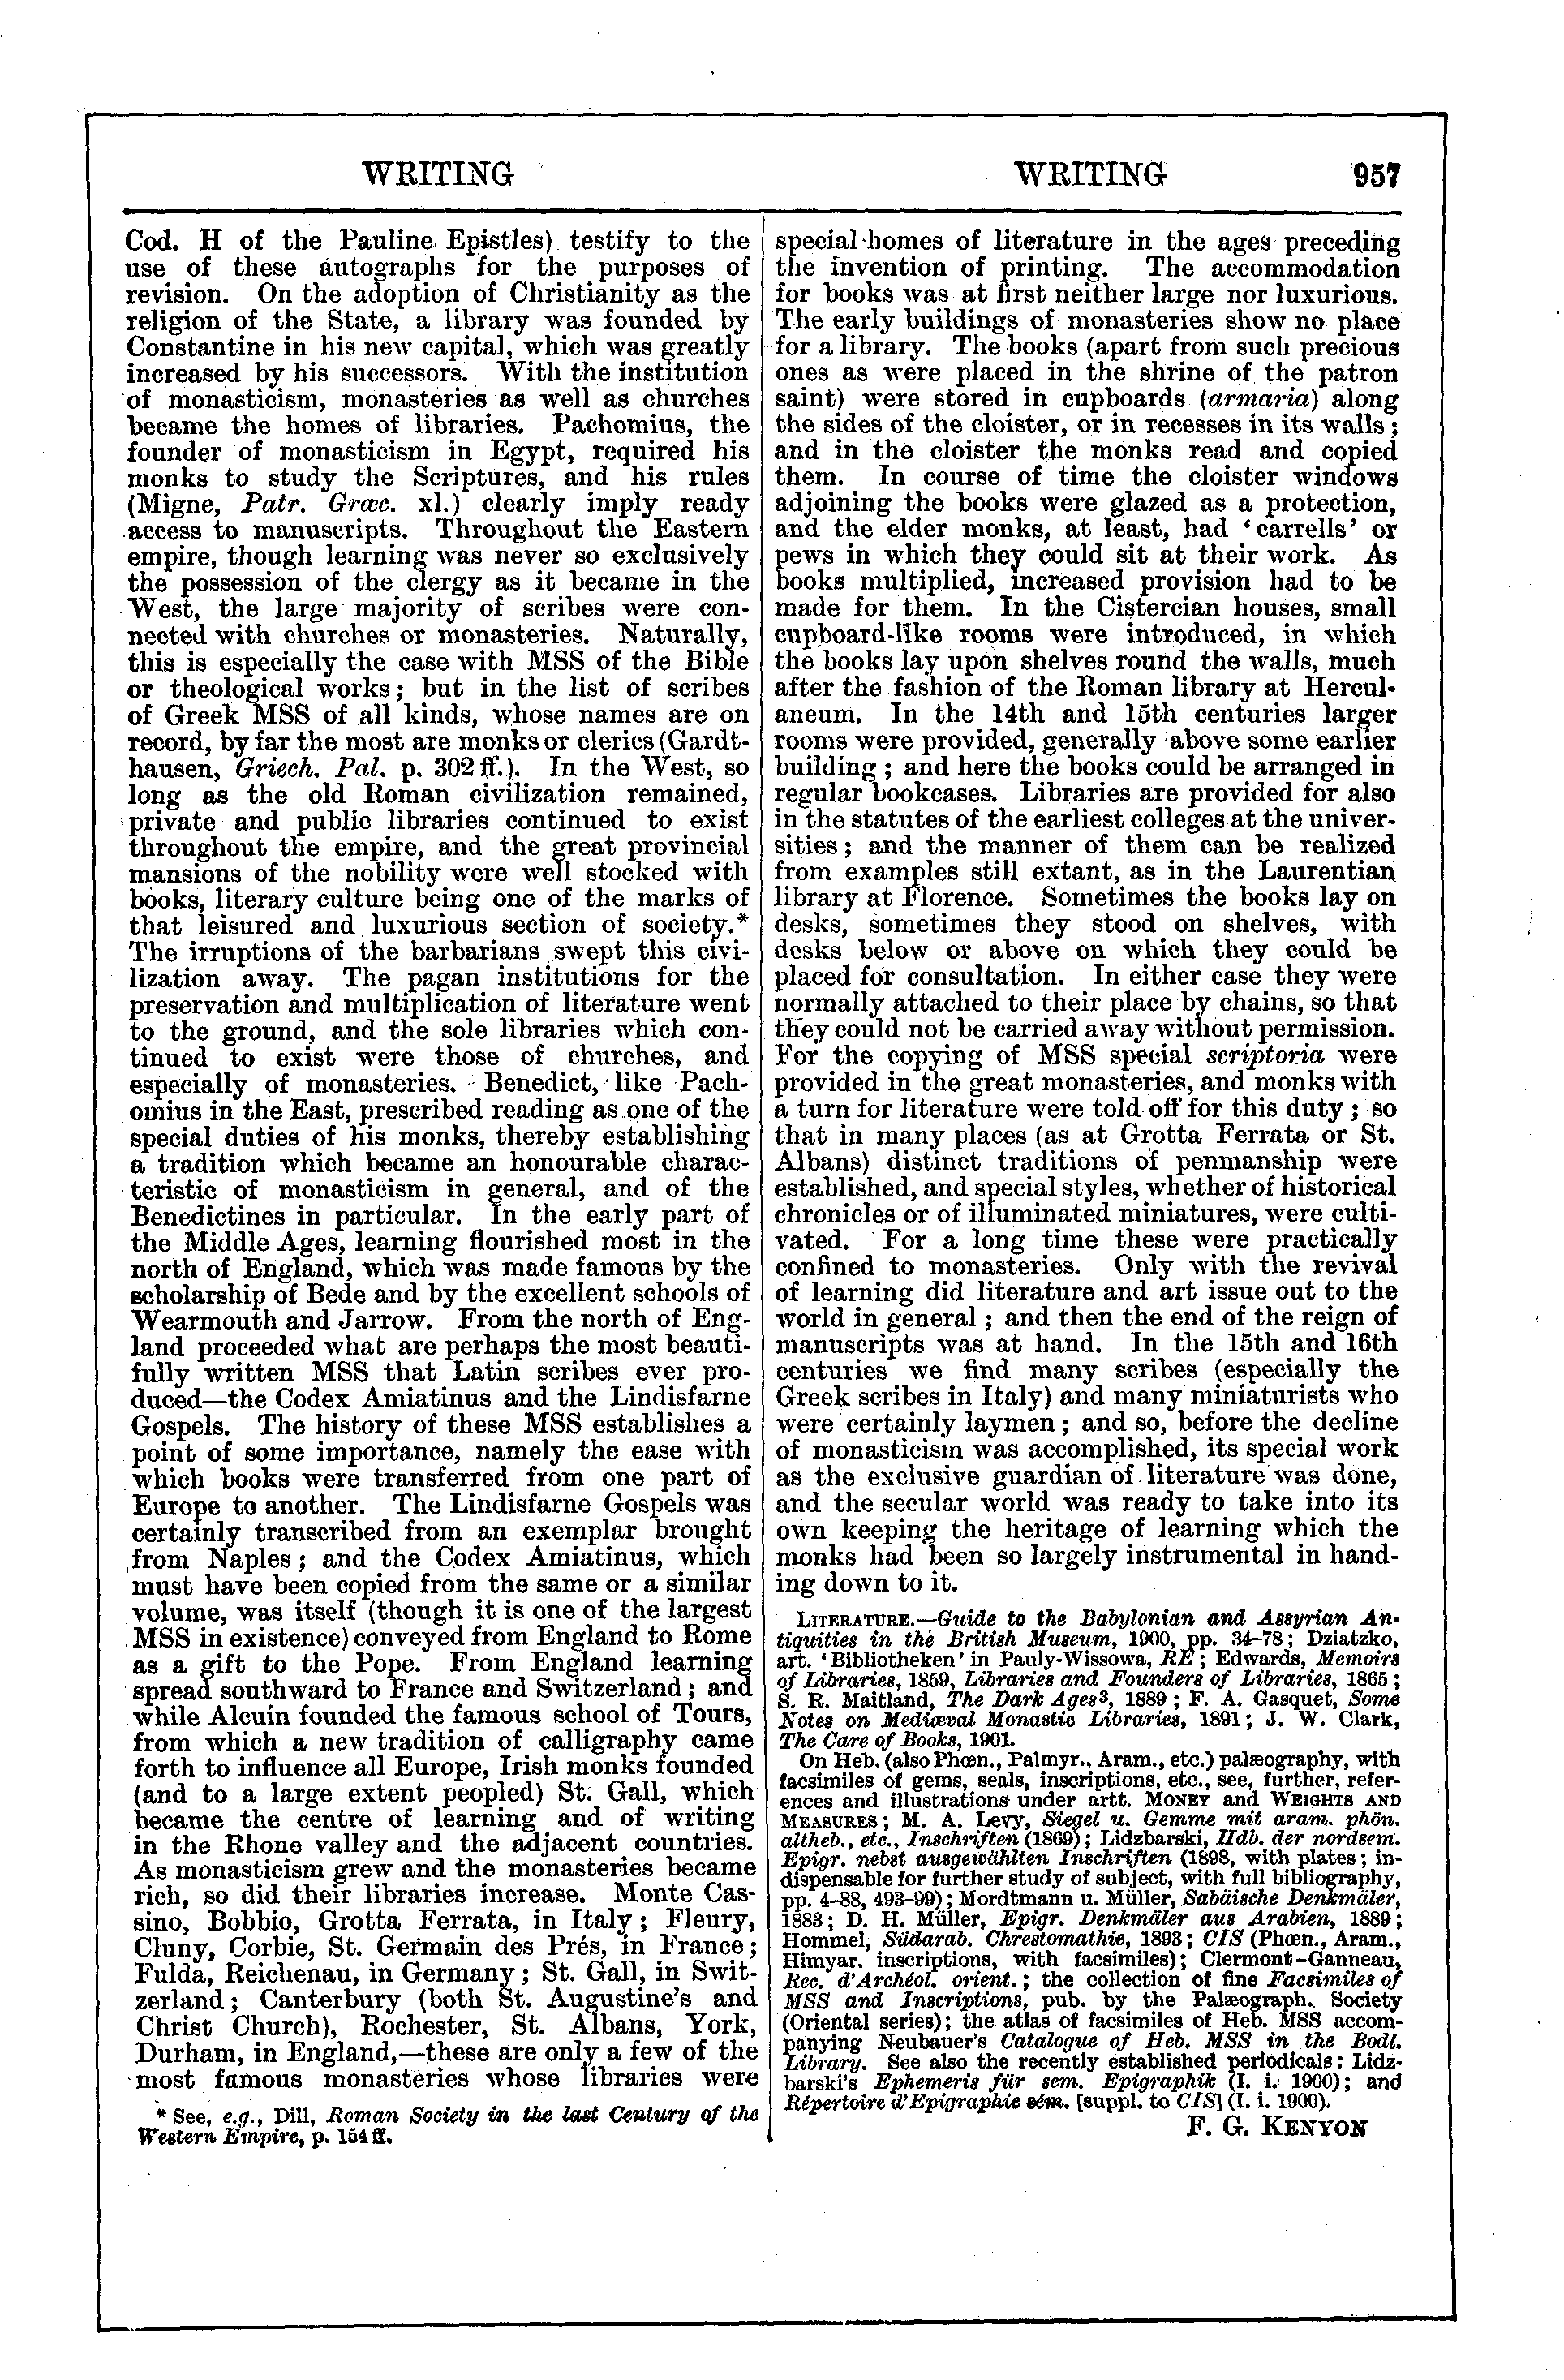 Image of page 957